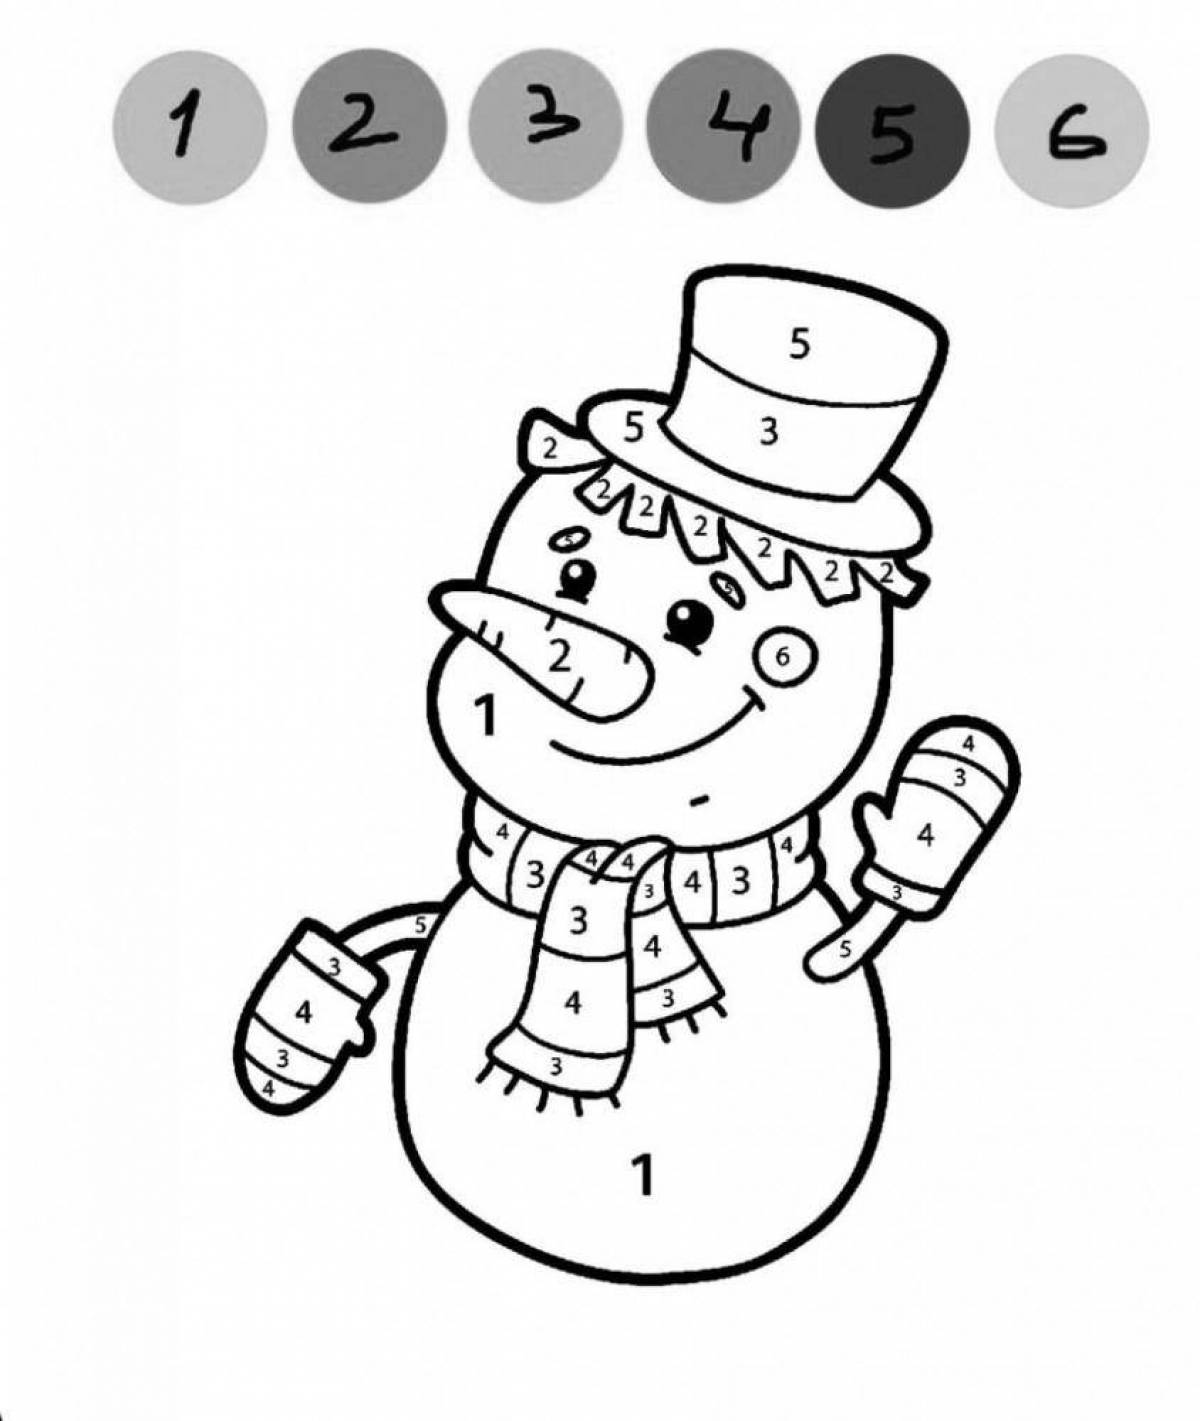 Snowman by numbers #7